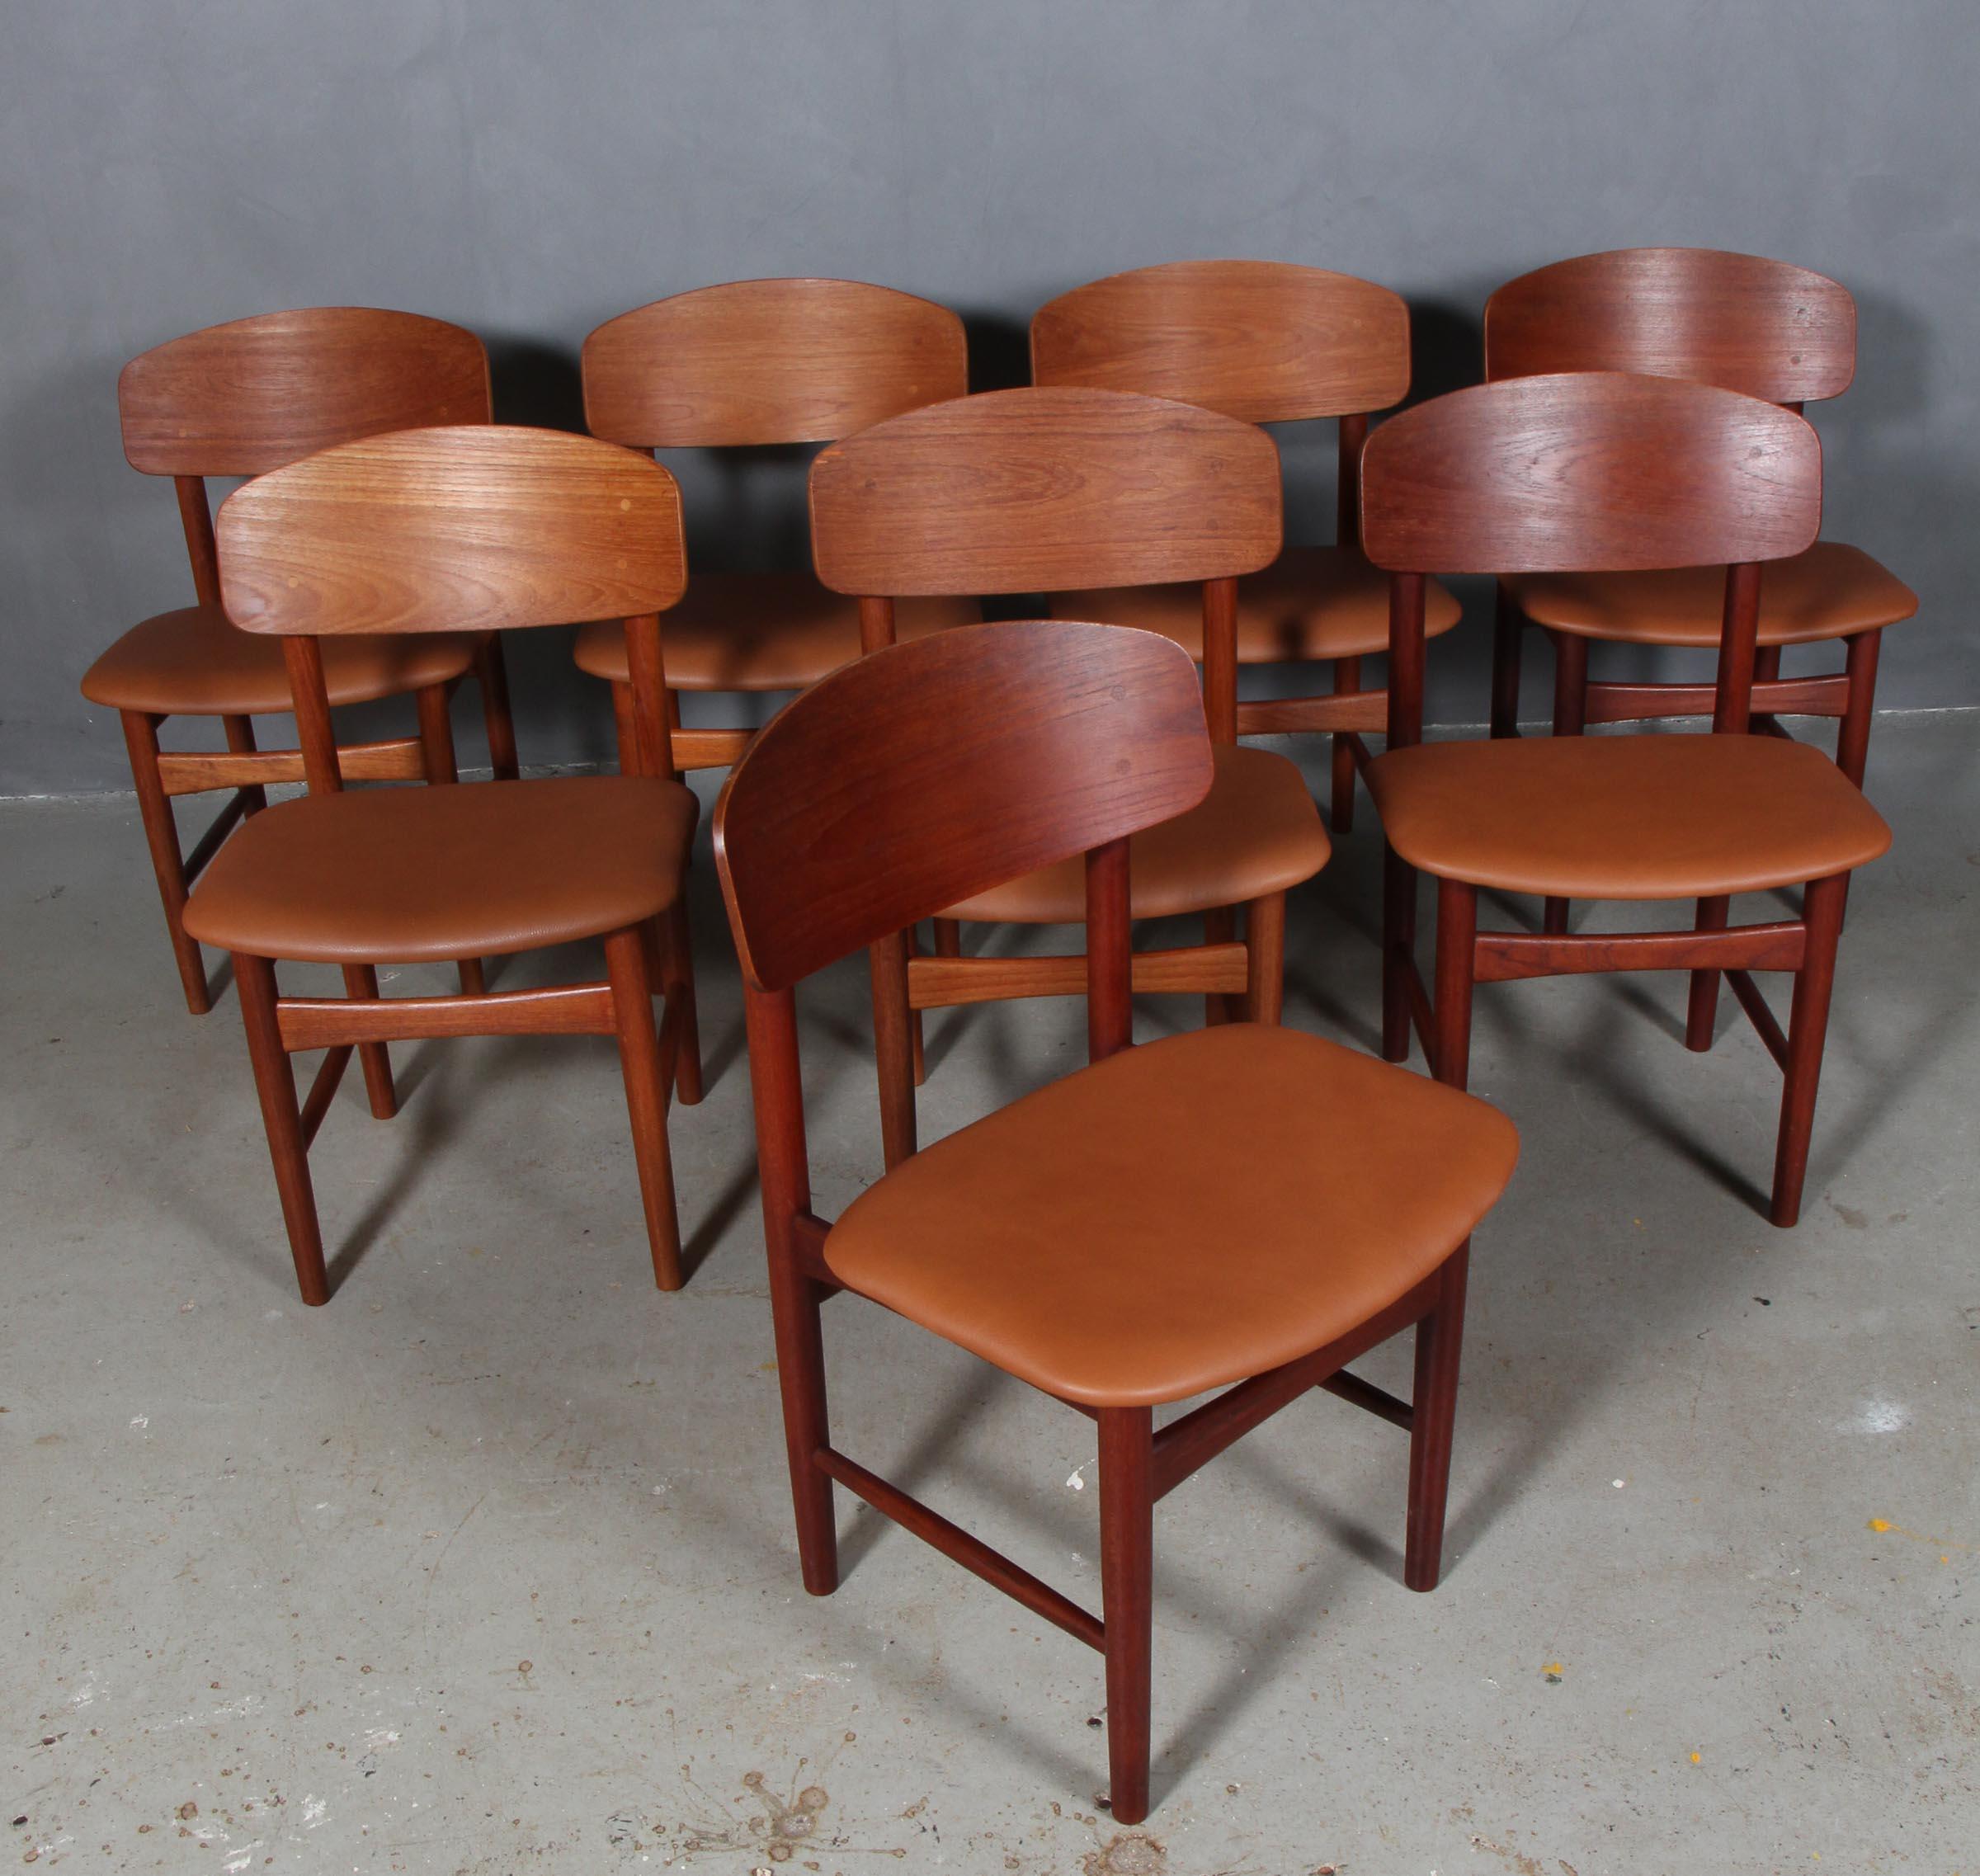 Børge Mogensen eight dining chairs. Partly solid teak.

New upholstered with cognac aniline leather.

Model 122, made by Søborg Møbler.